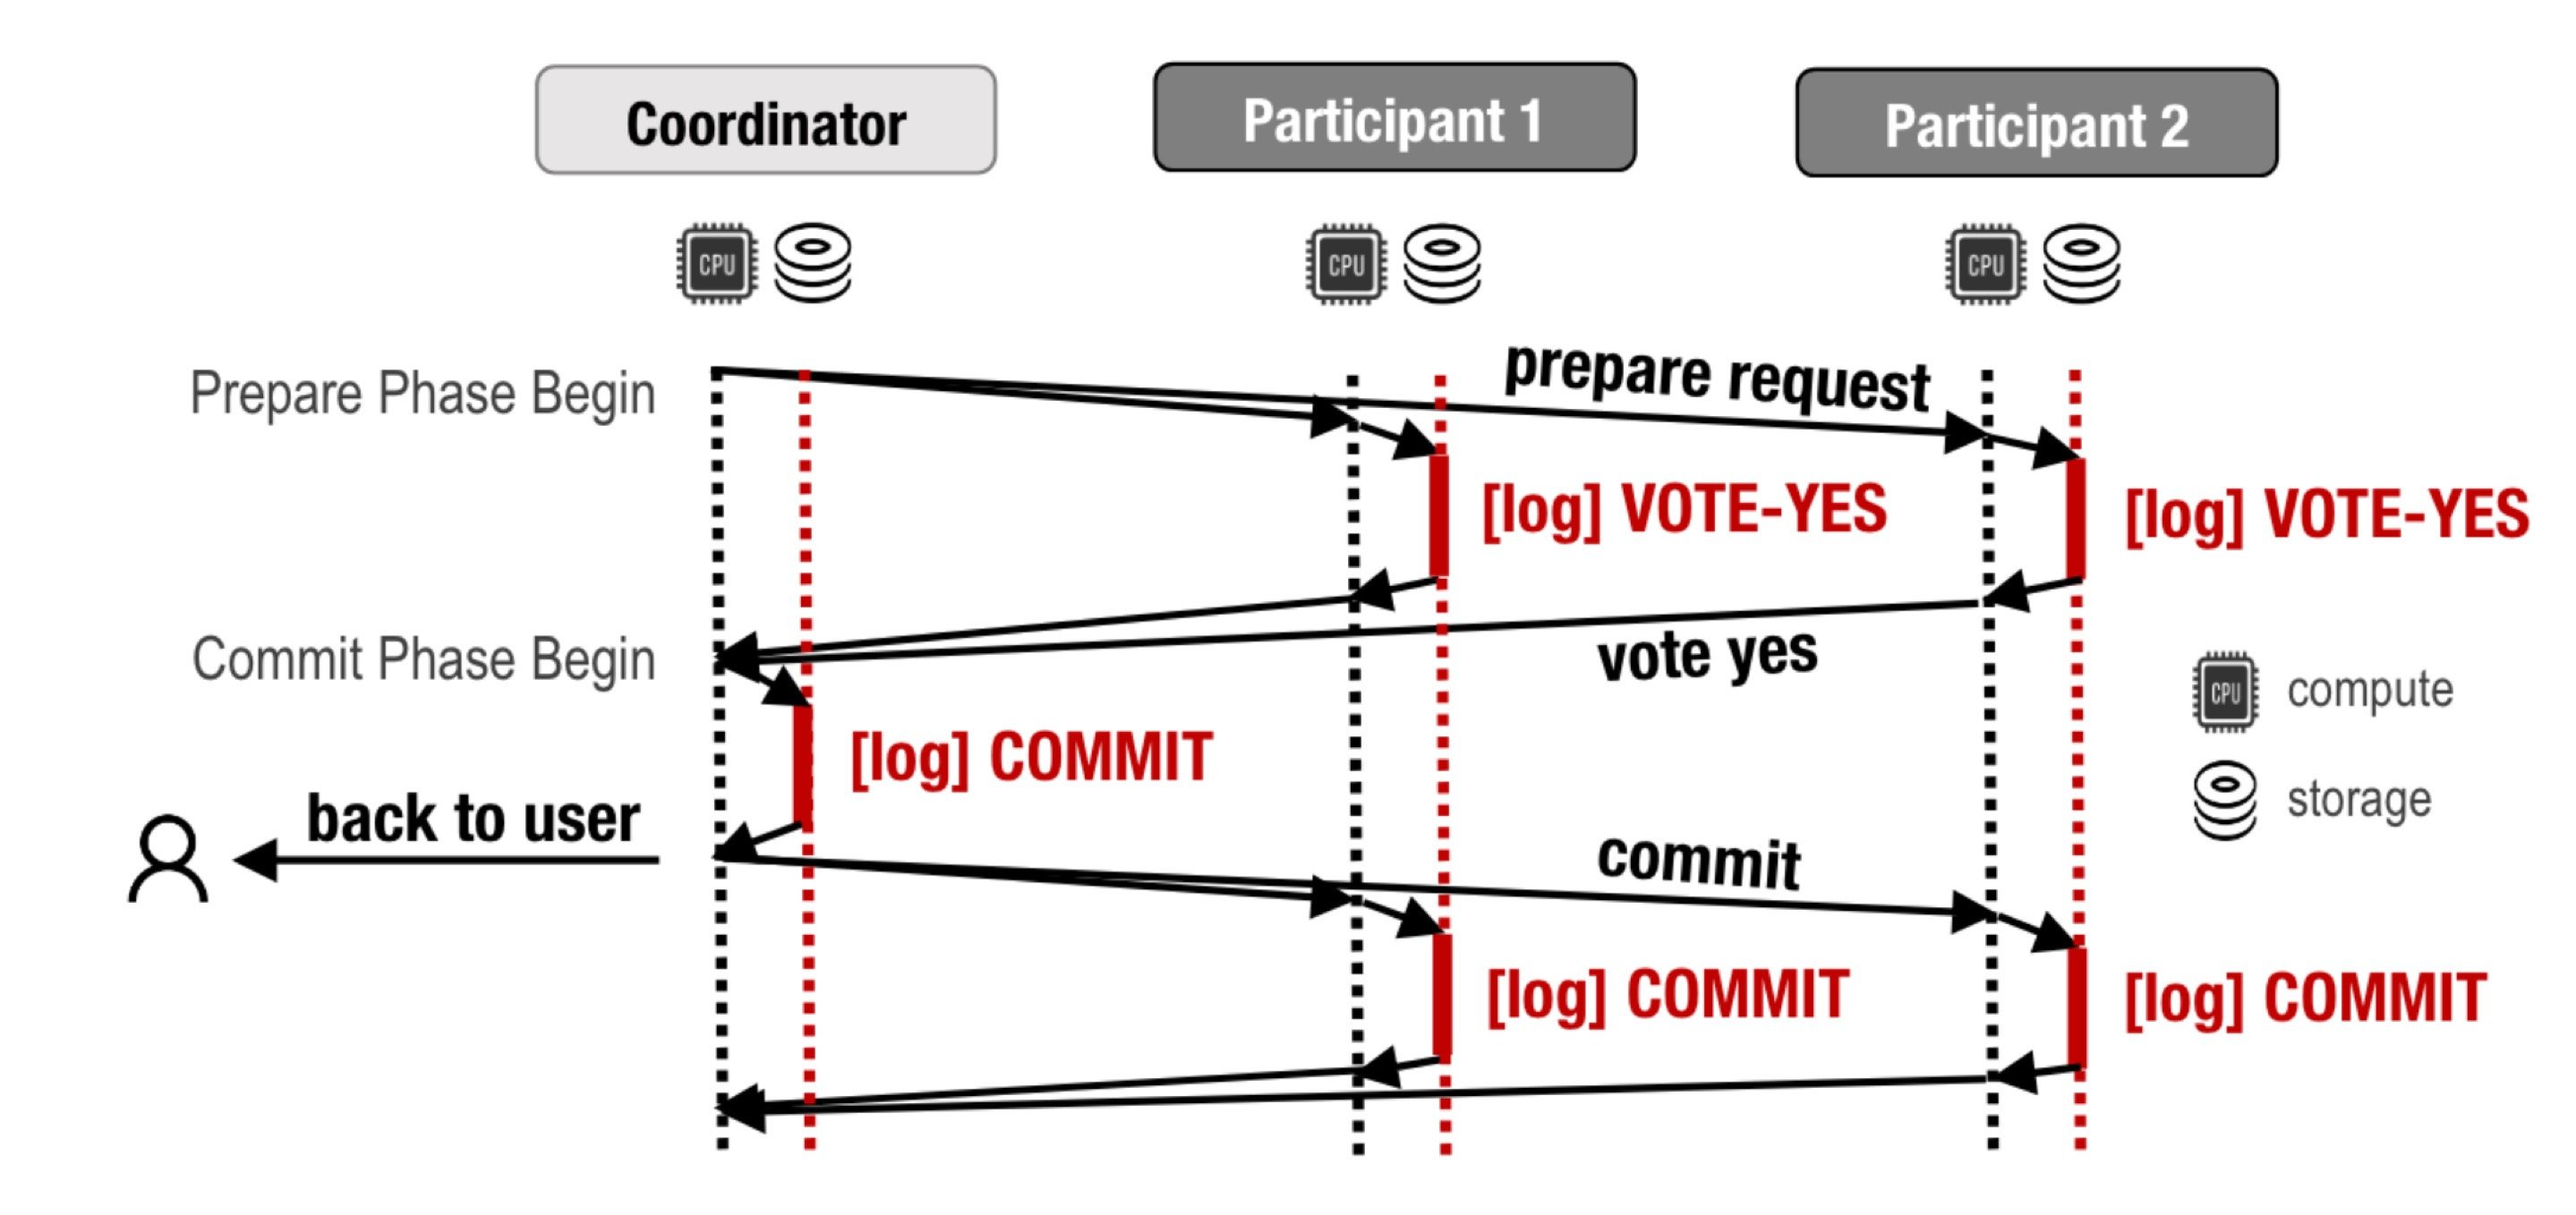 Diagram of interactions among the user, coordinator, and participants. See the paragraph below.